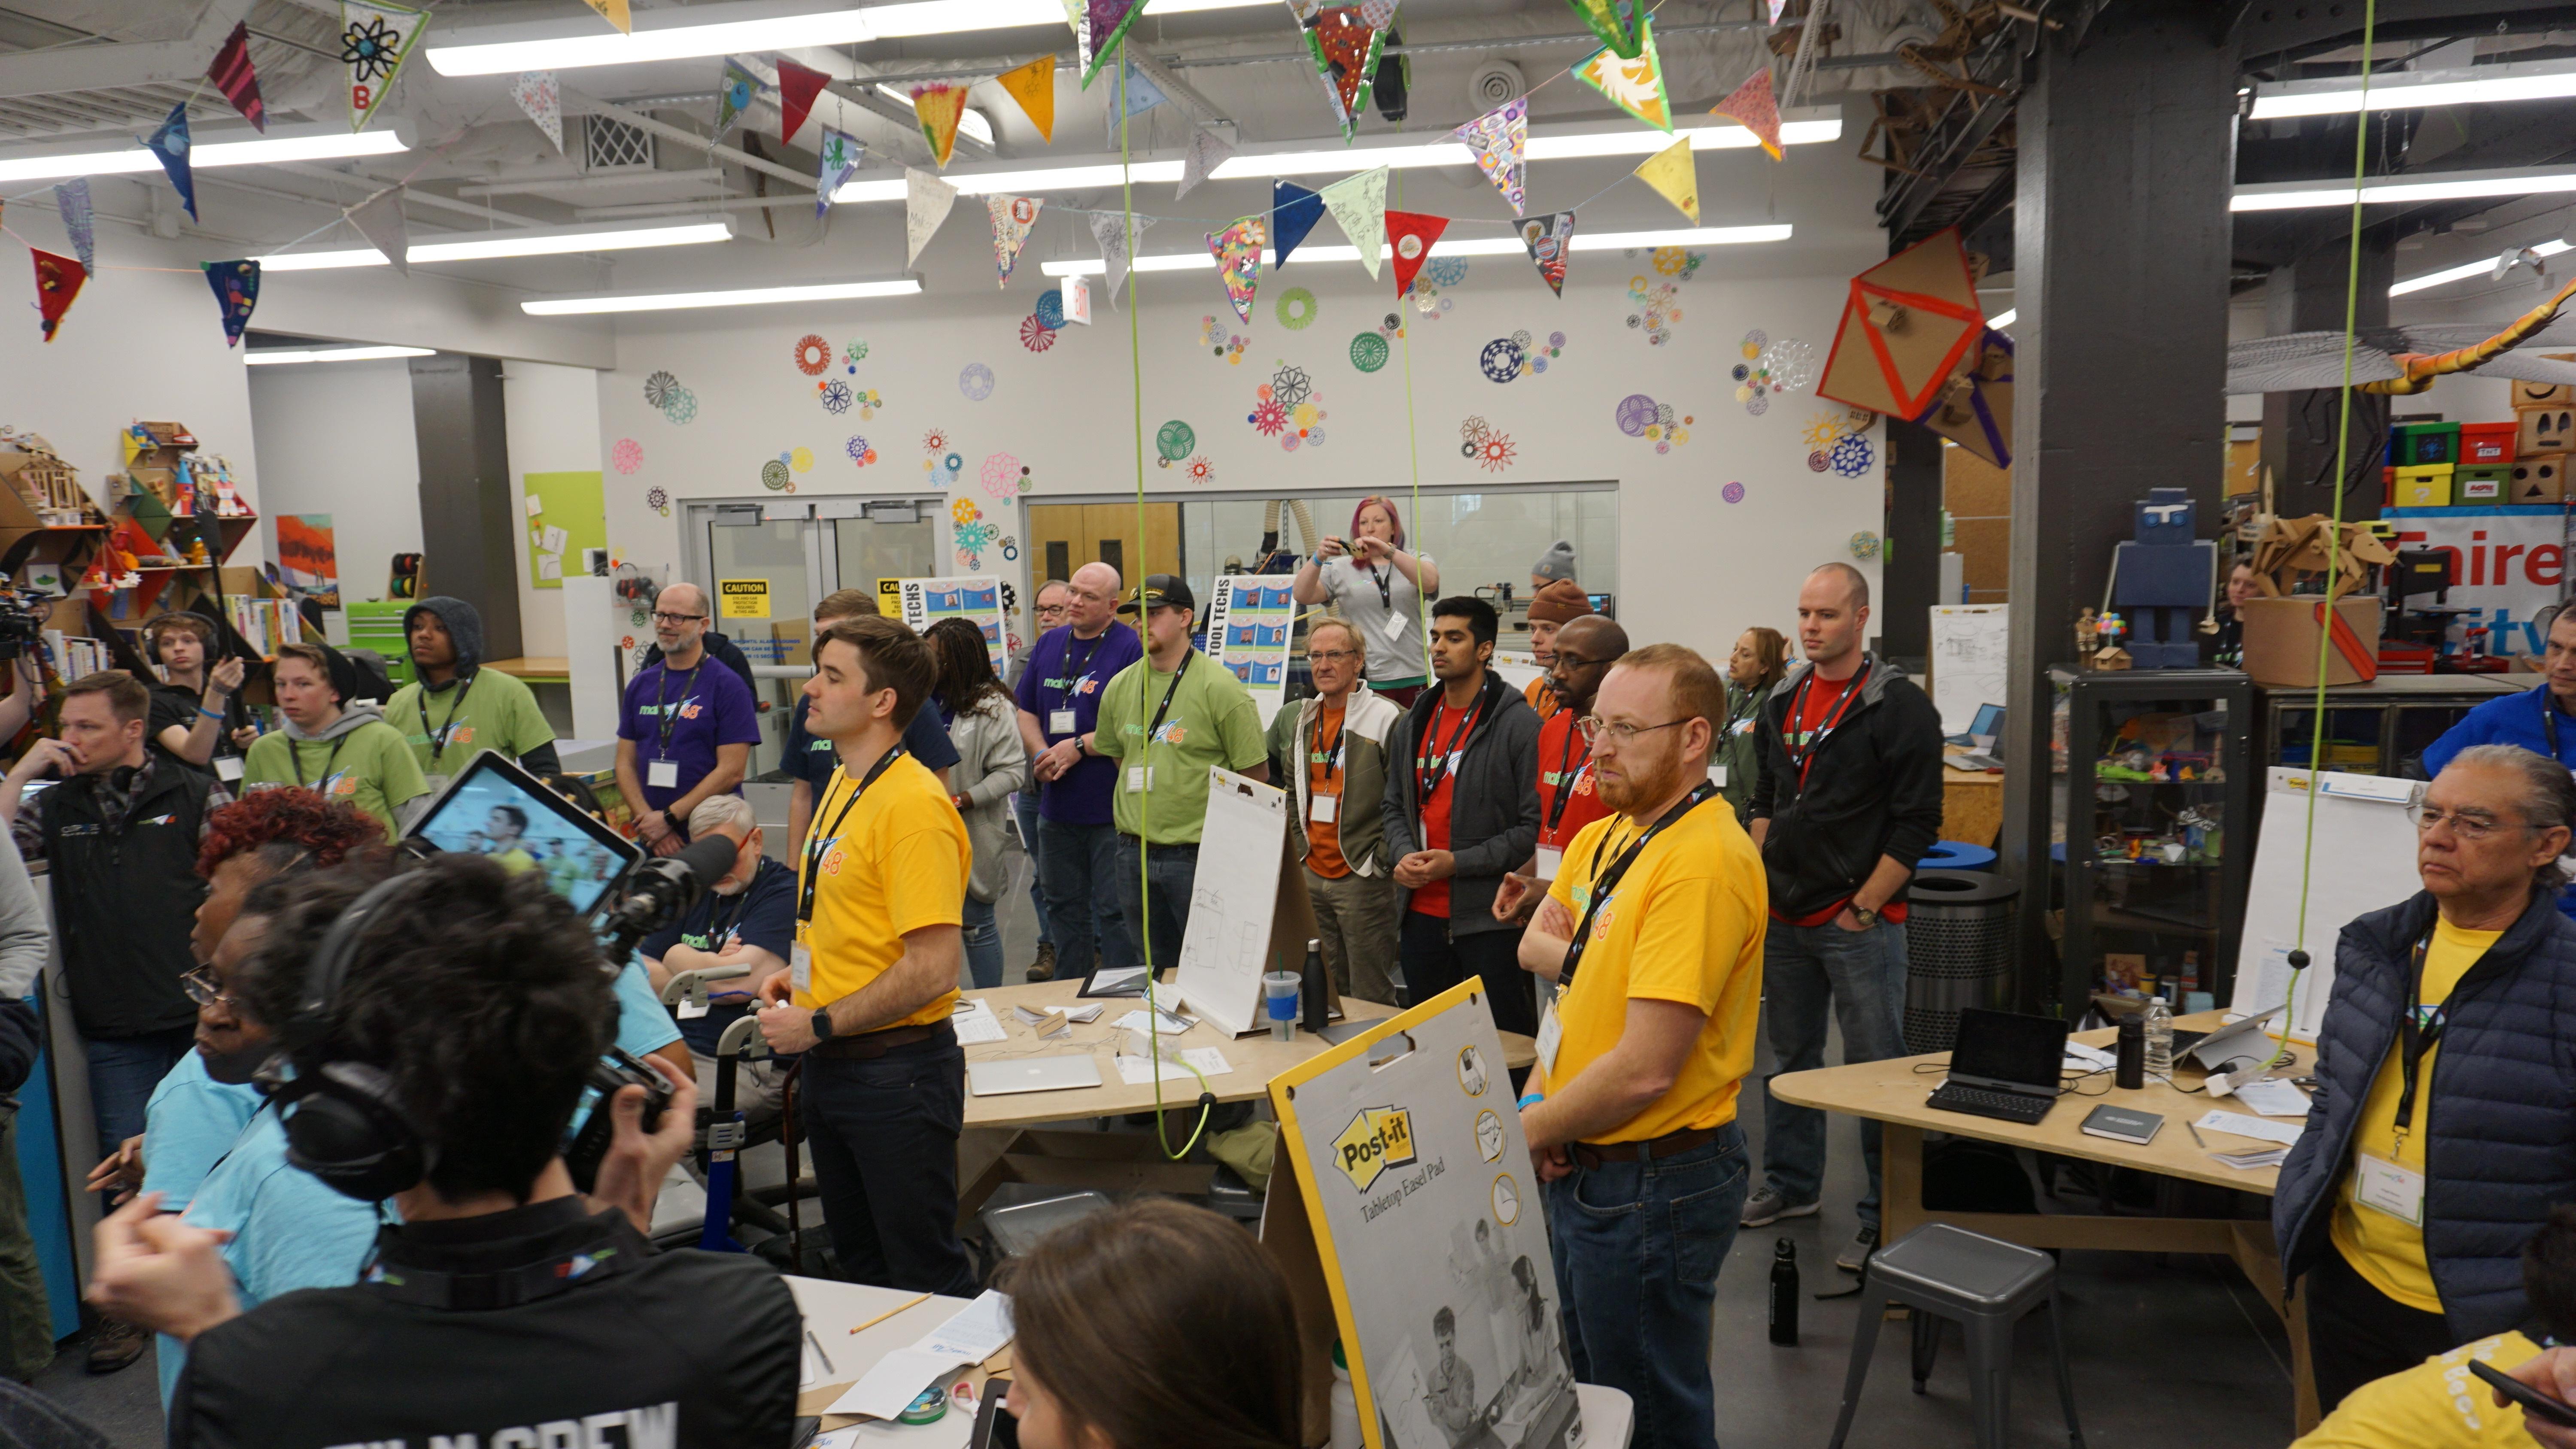 Photo of Makerspace with a room of people with colorful shirts